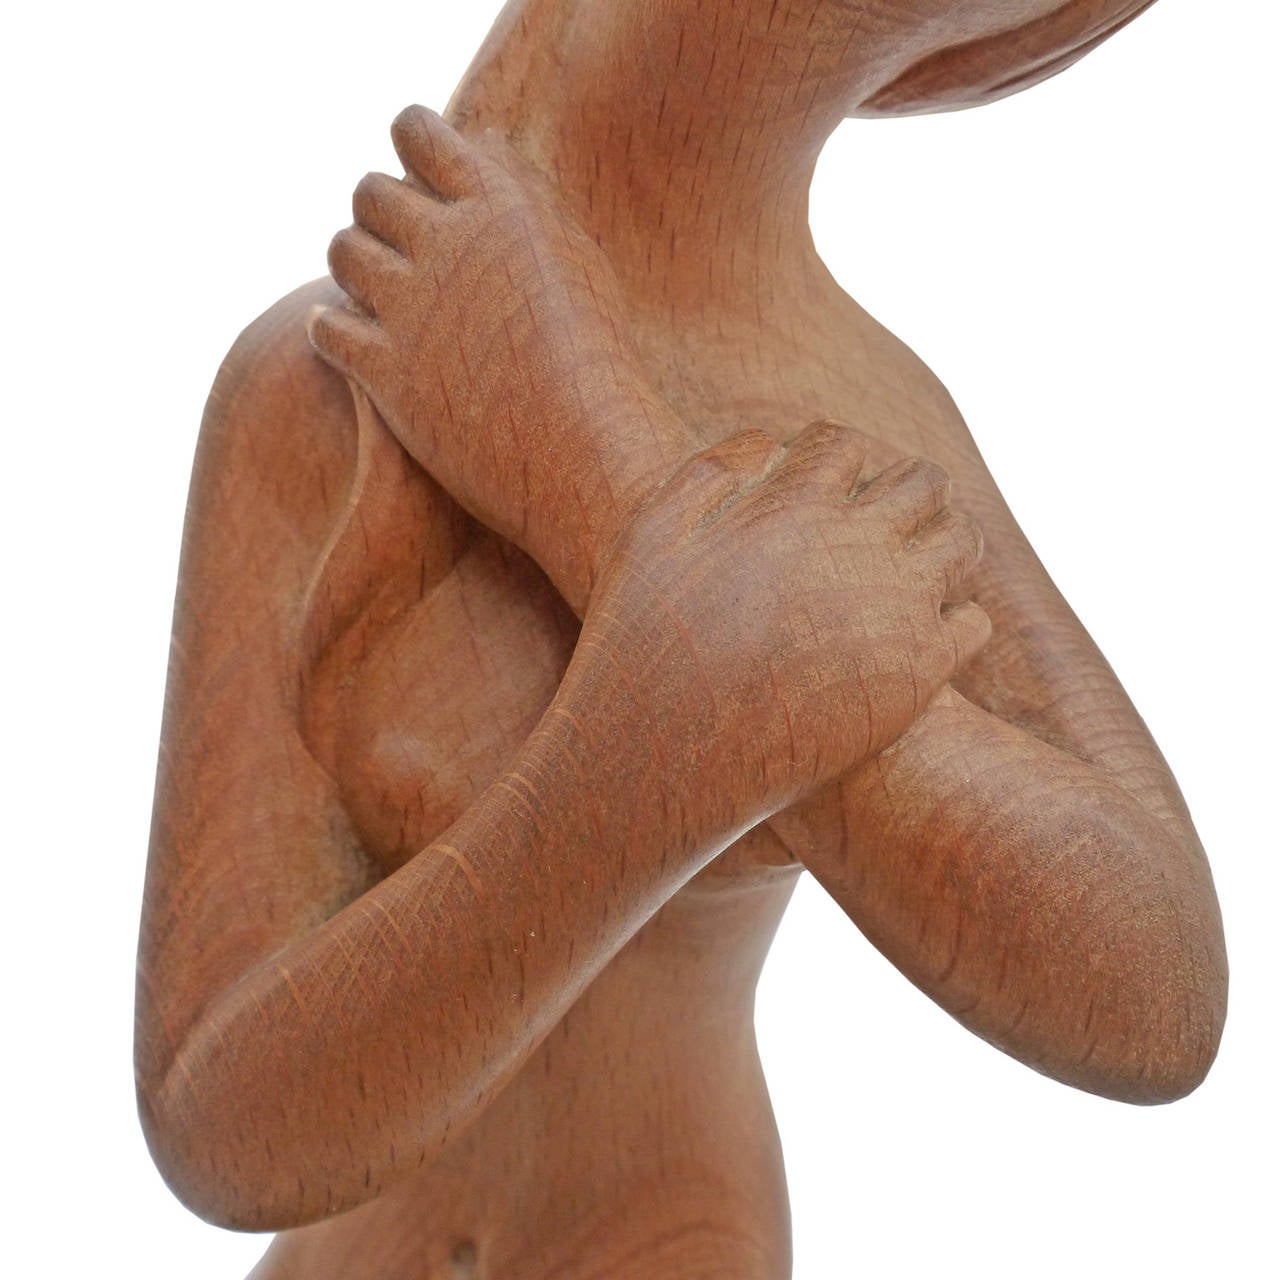 Luis Sanguino Hand-Carved Mahogany Sculpture of a Nude Woman 1